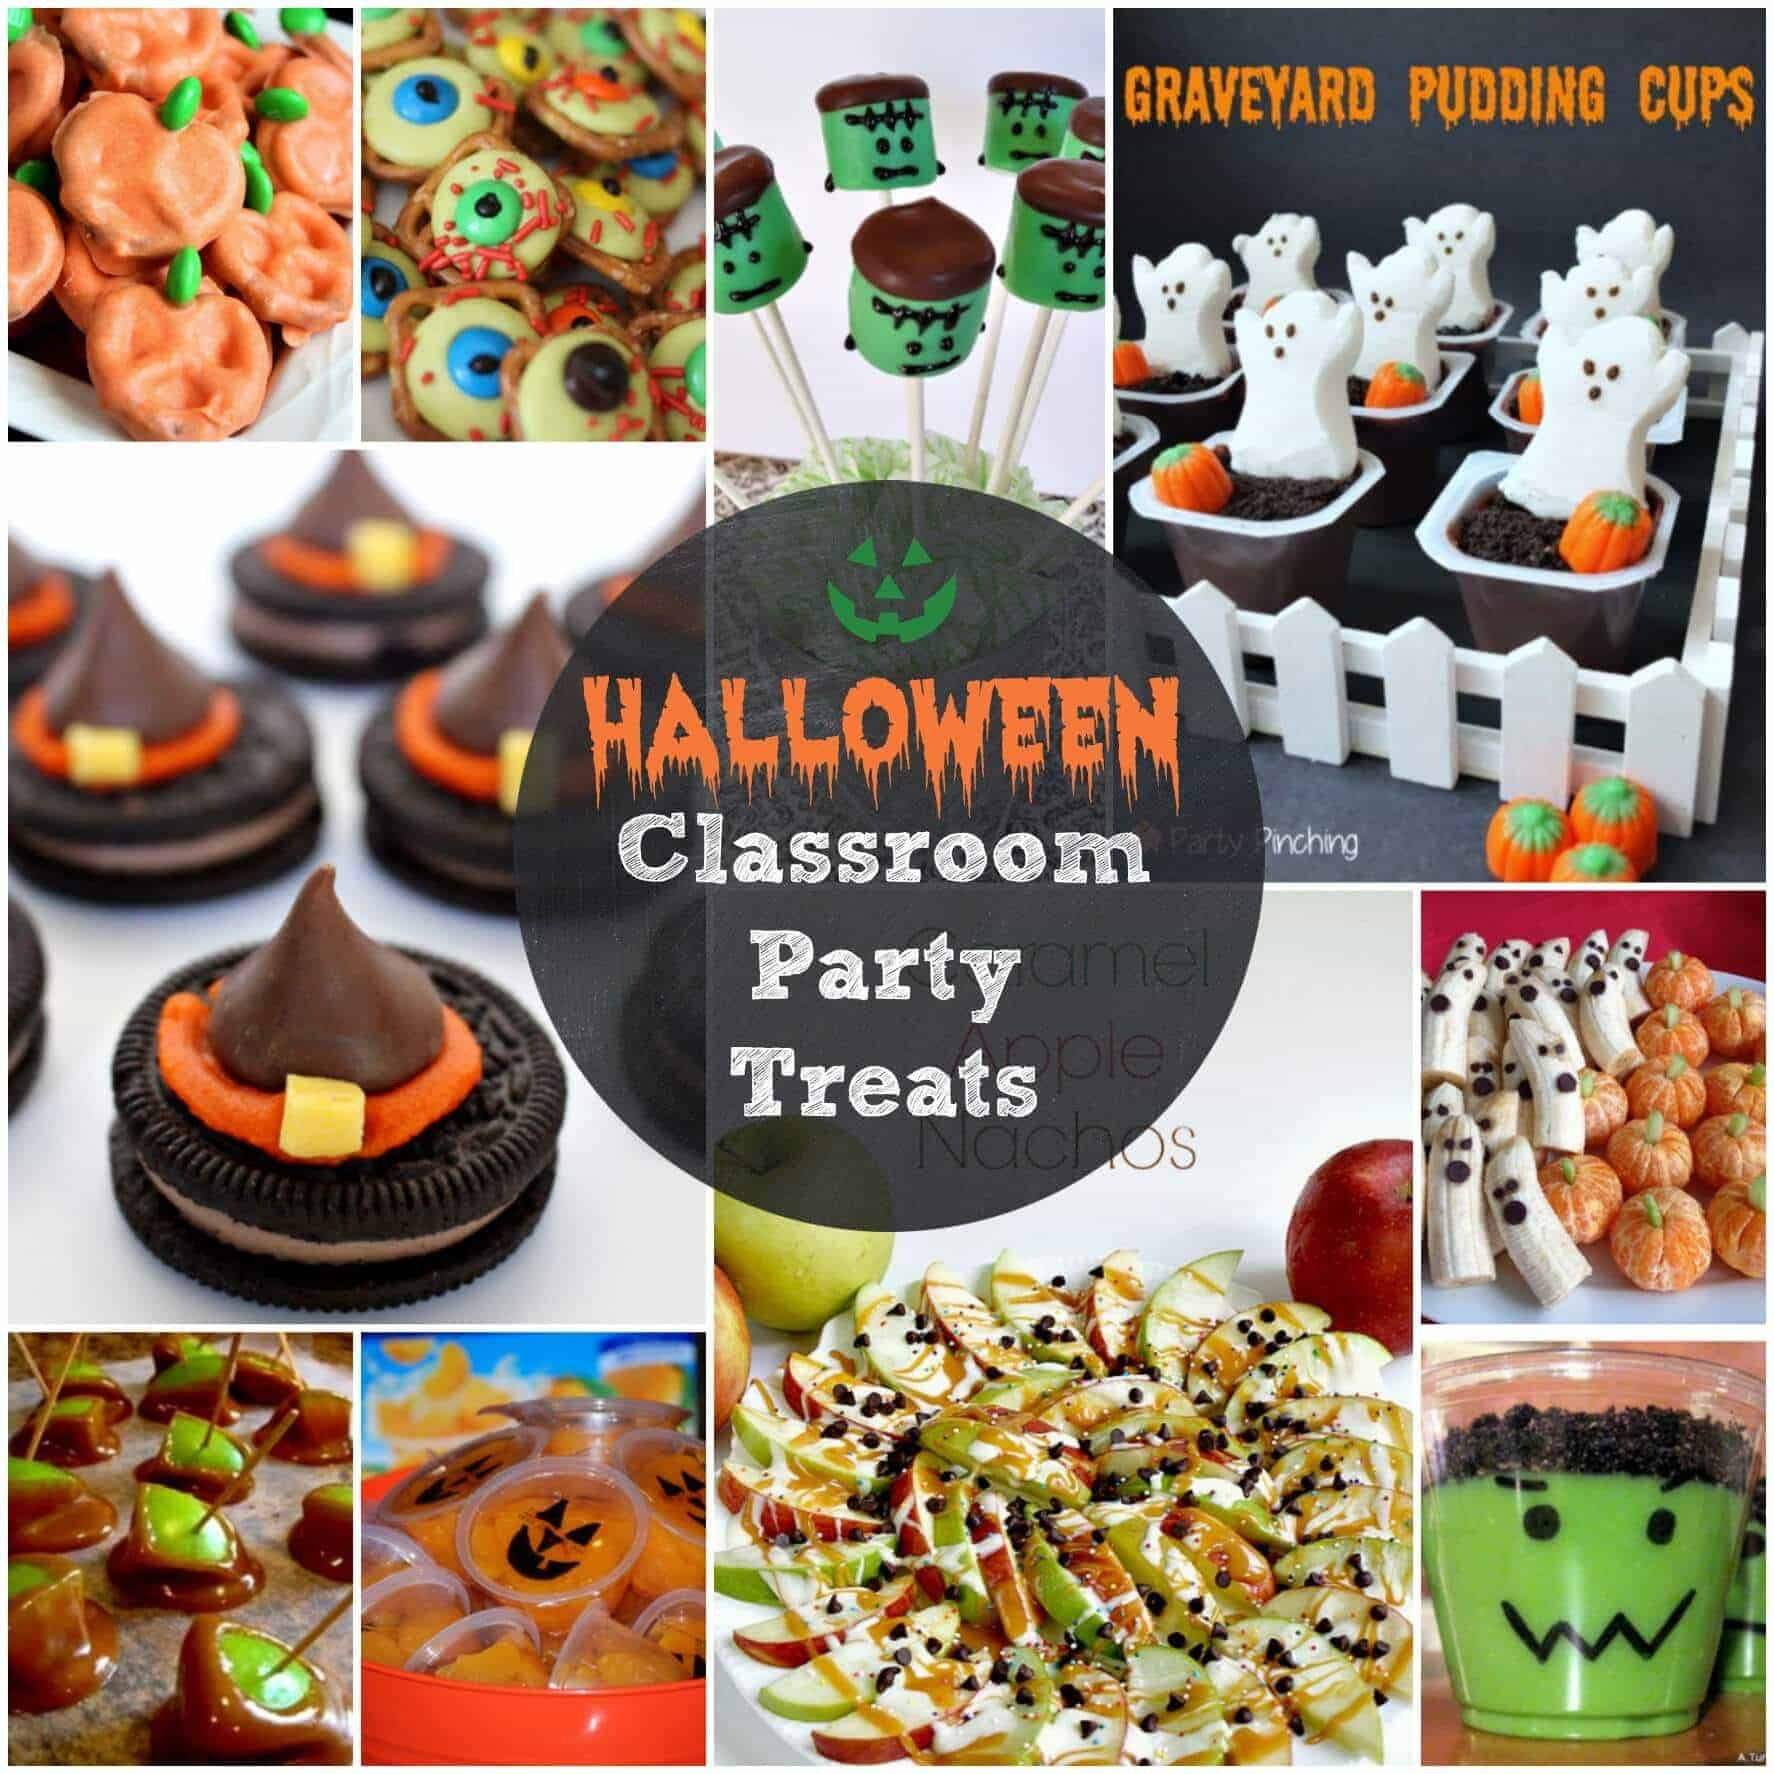 Halloween Party Ideas For School Classrooms
 Easy Halloween Treats for Your Classroom Parties